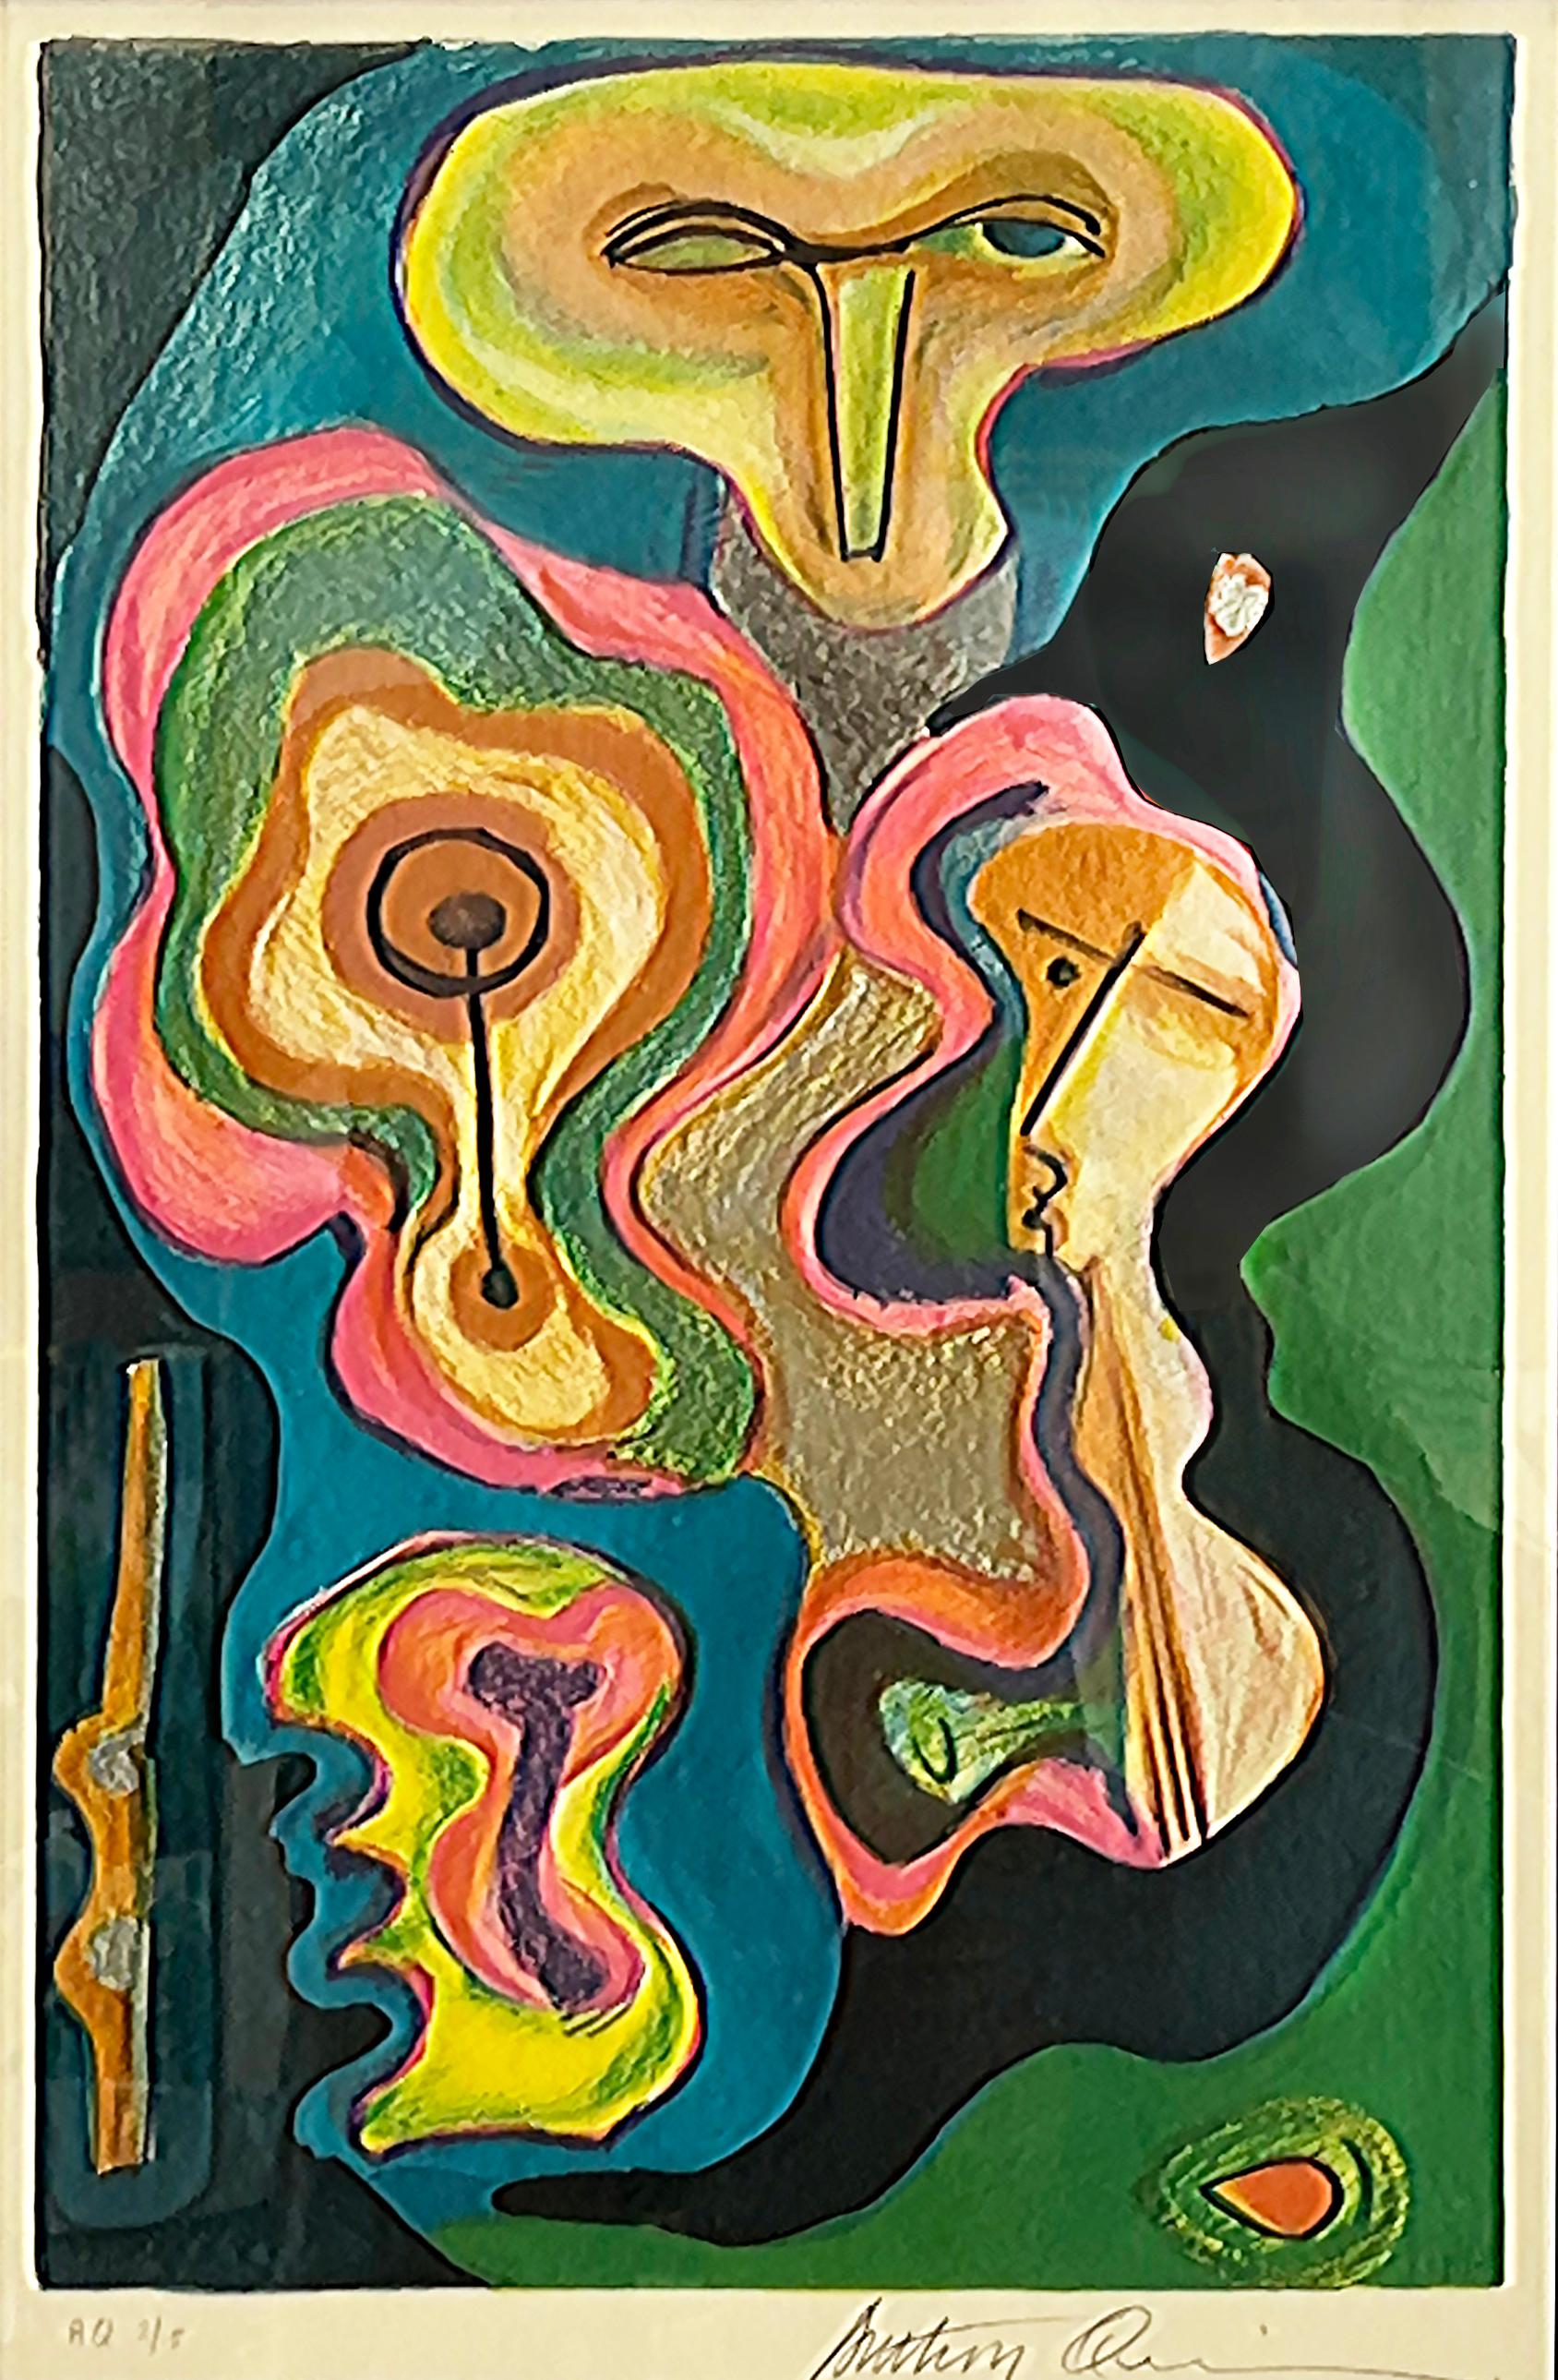 80s Anthony Quinn Abstract Signed Limited Edition Lithograph 2/15 Tribal Series

Offered for sale is an original abstract Lithograph but the world-famous actor Anthony Quinn. The limited edition lithograph is signed by the artists and numbered 2/15